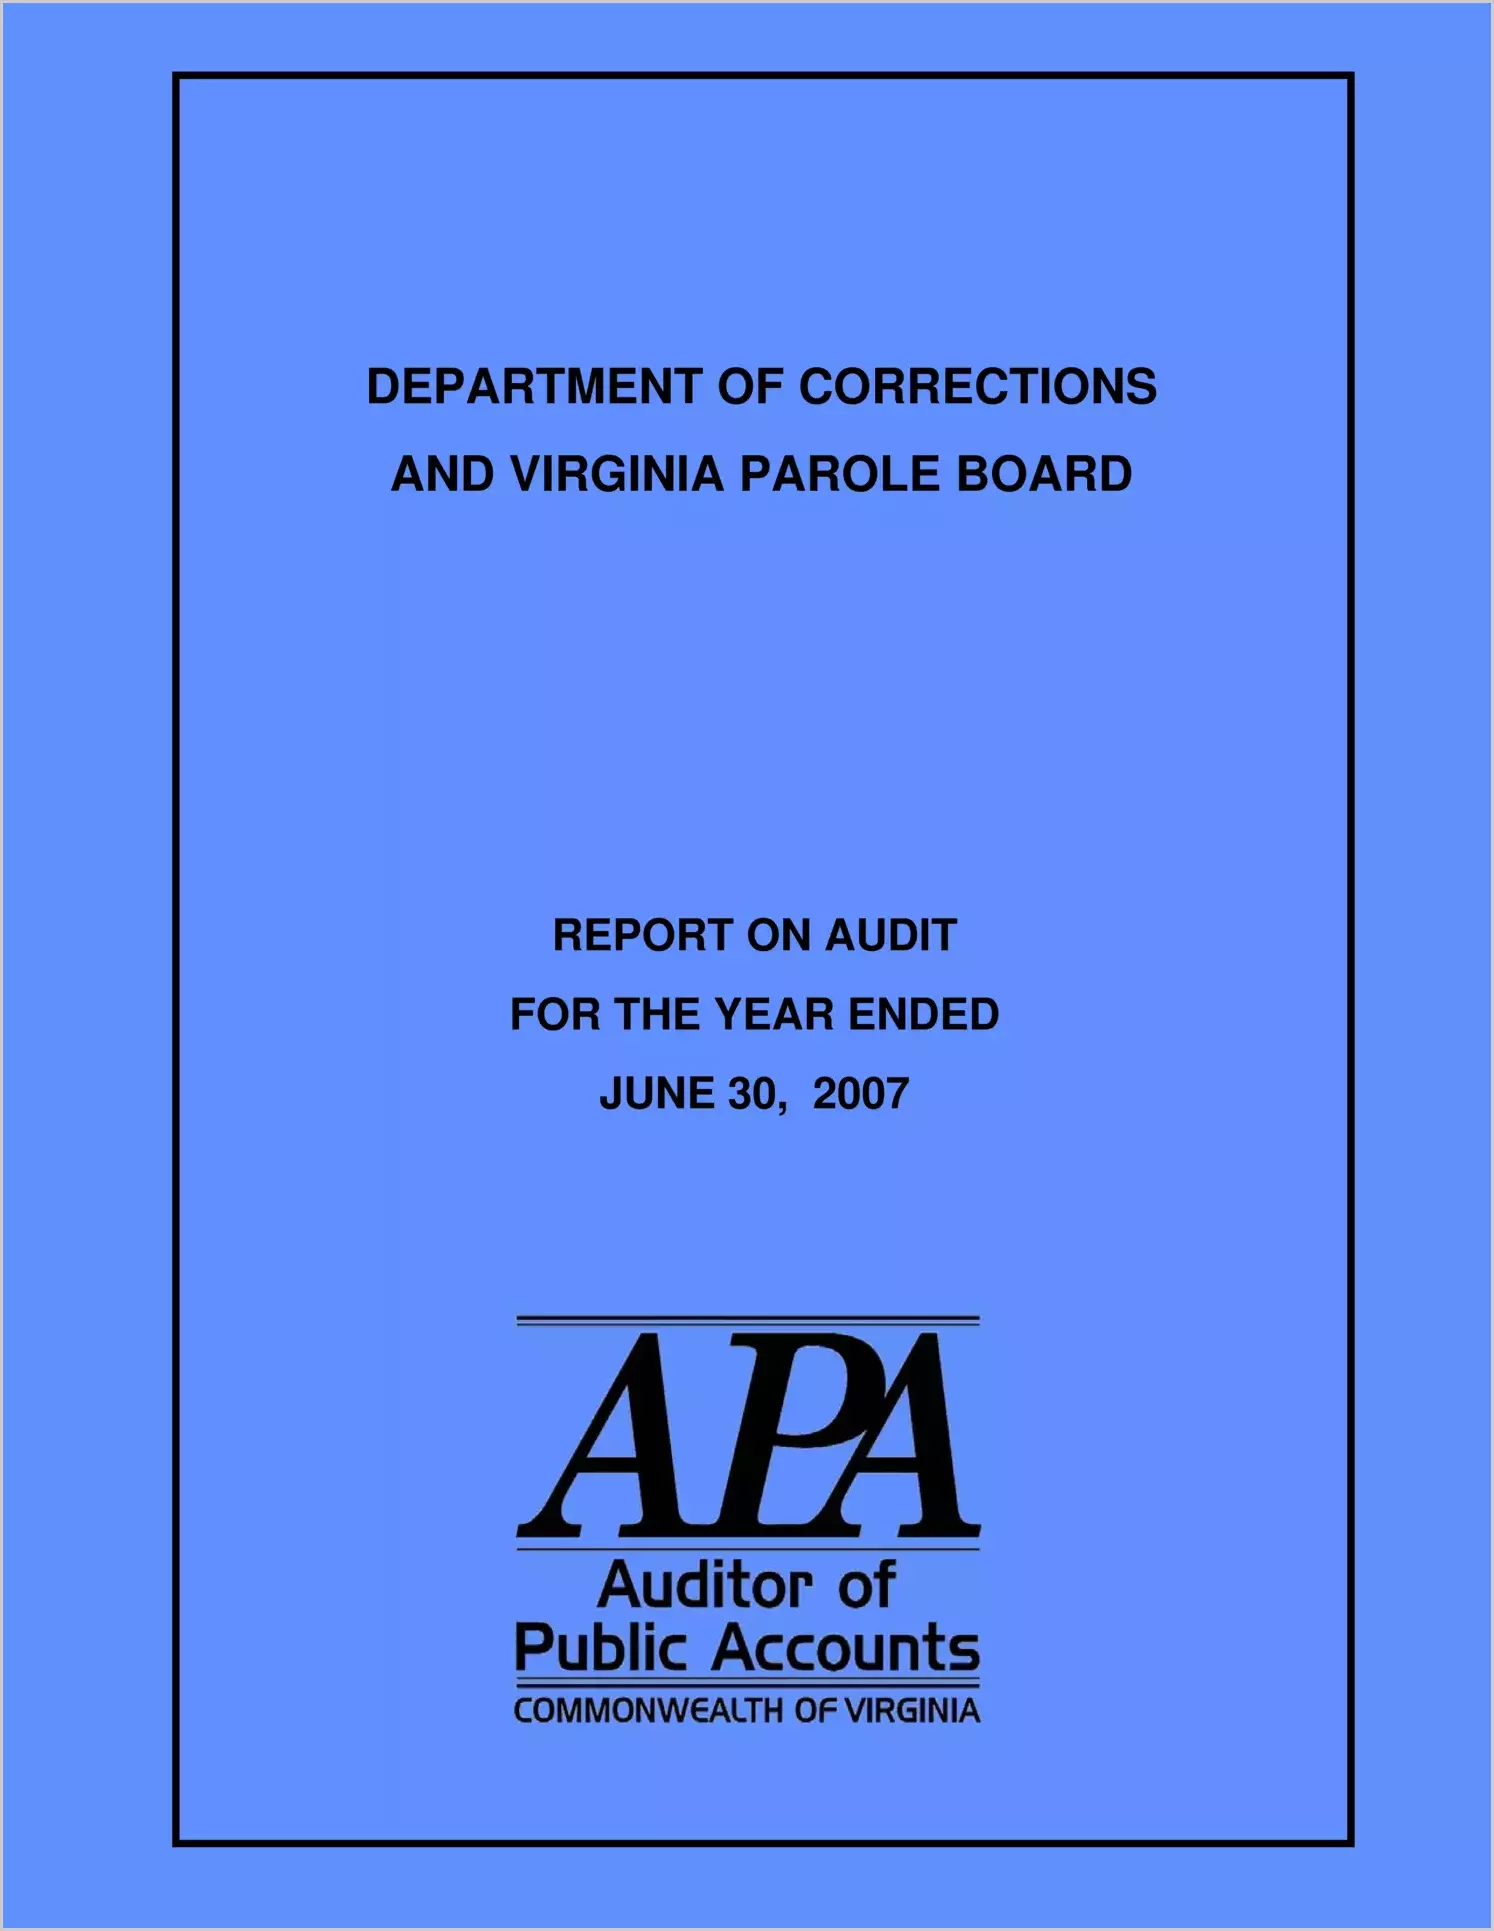 Department of Corrections and Virginia Parole Board report on audit for the year ended June 30, 2007